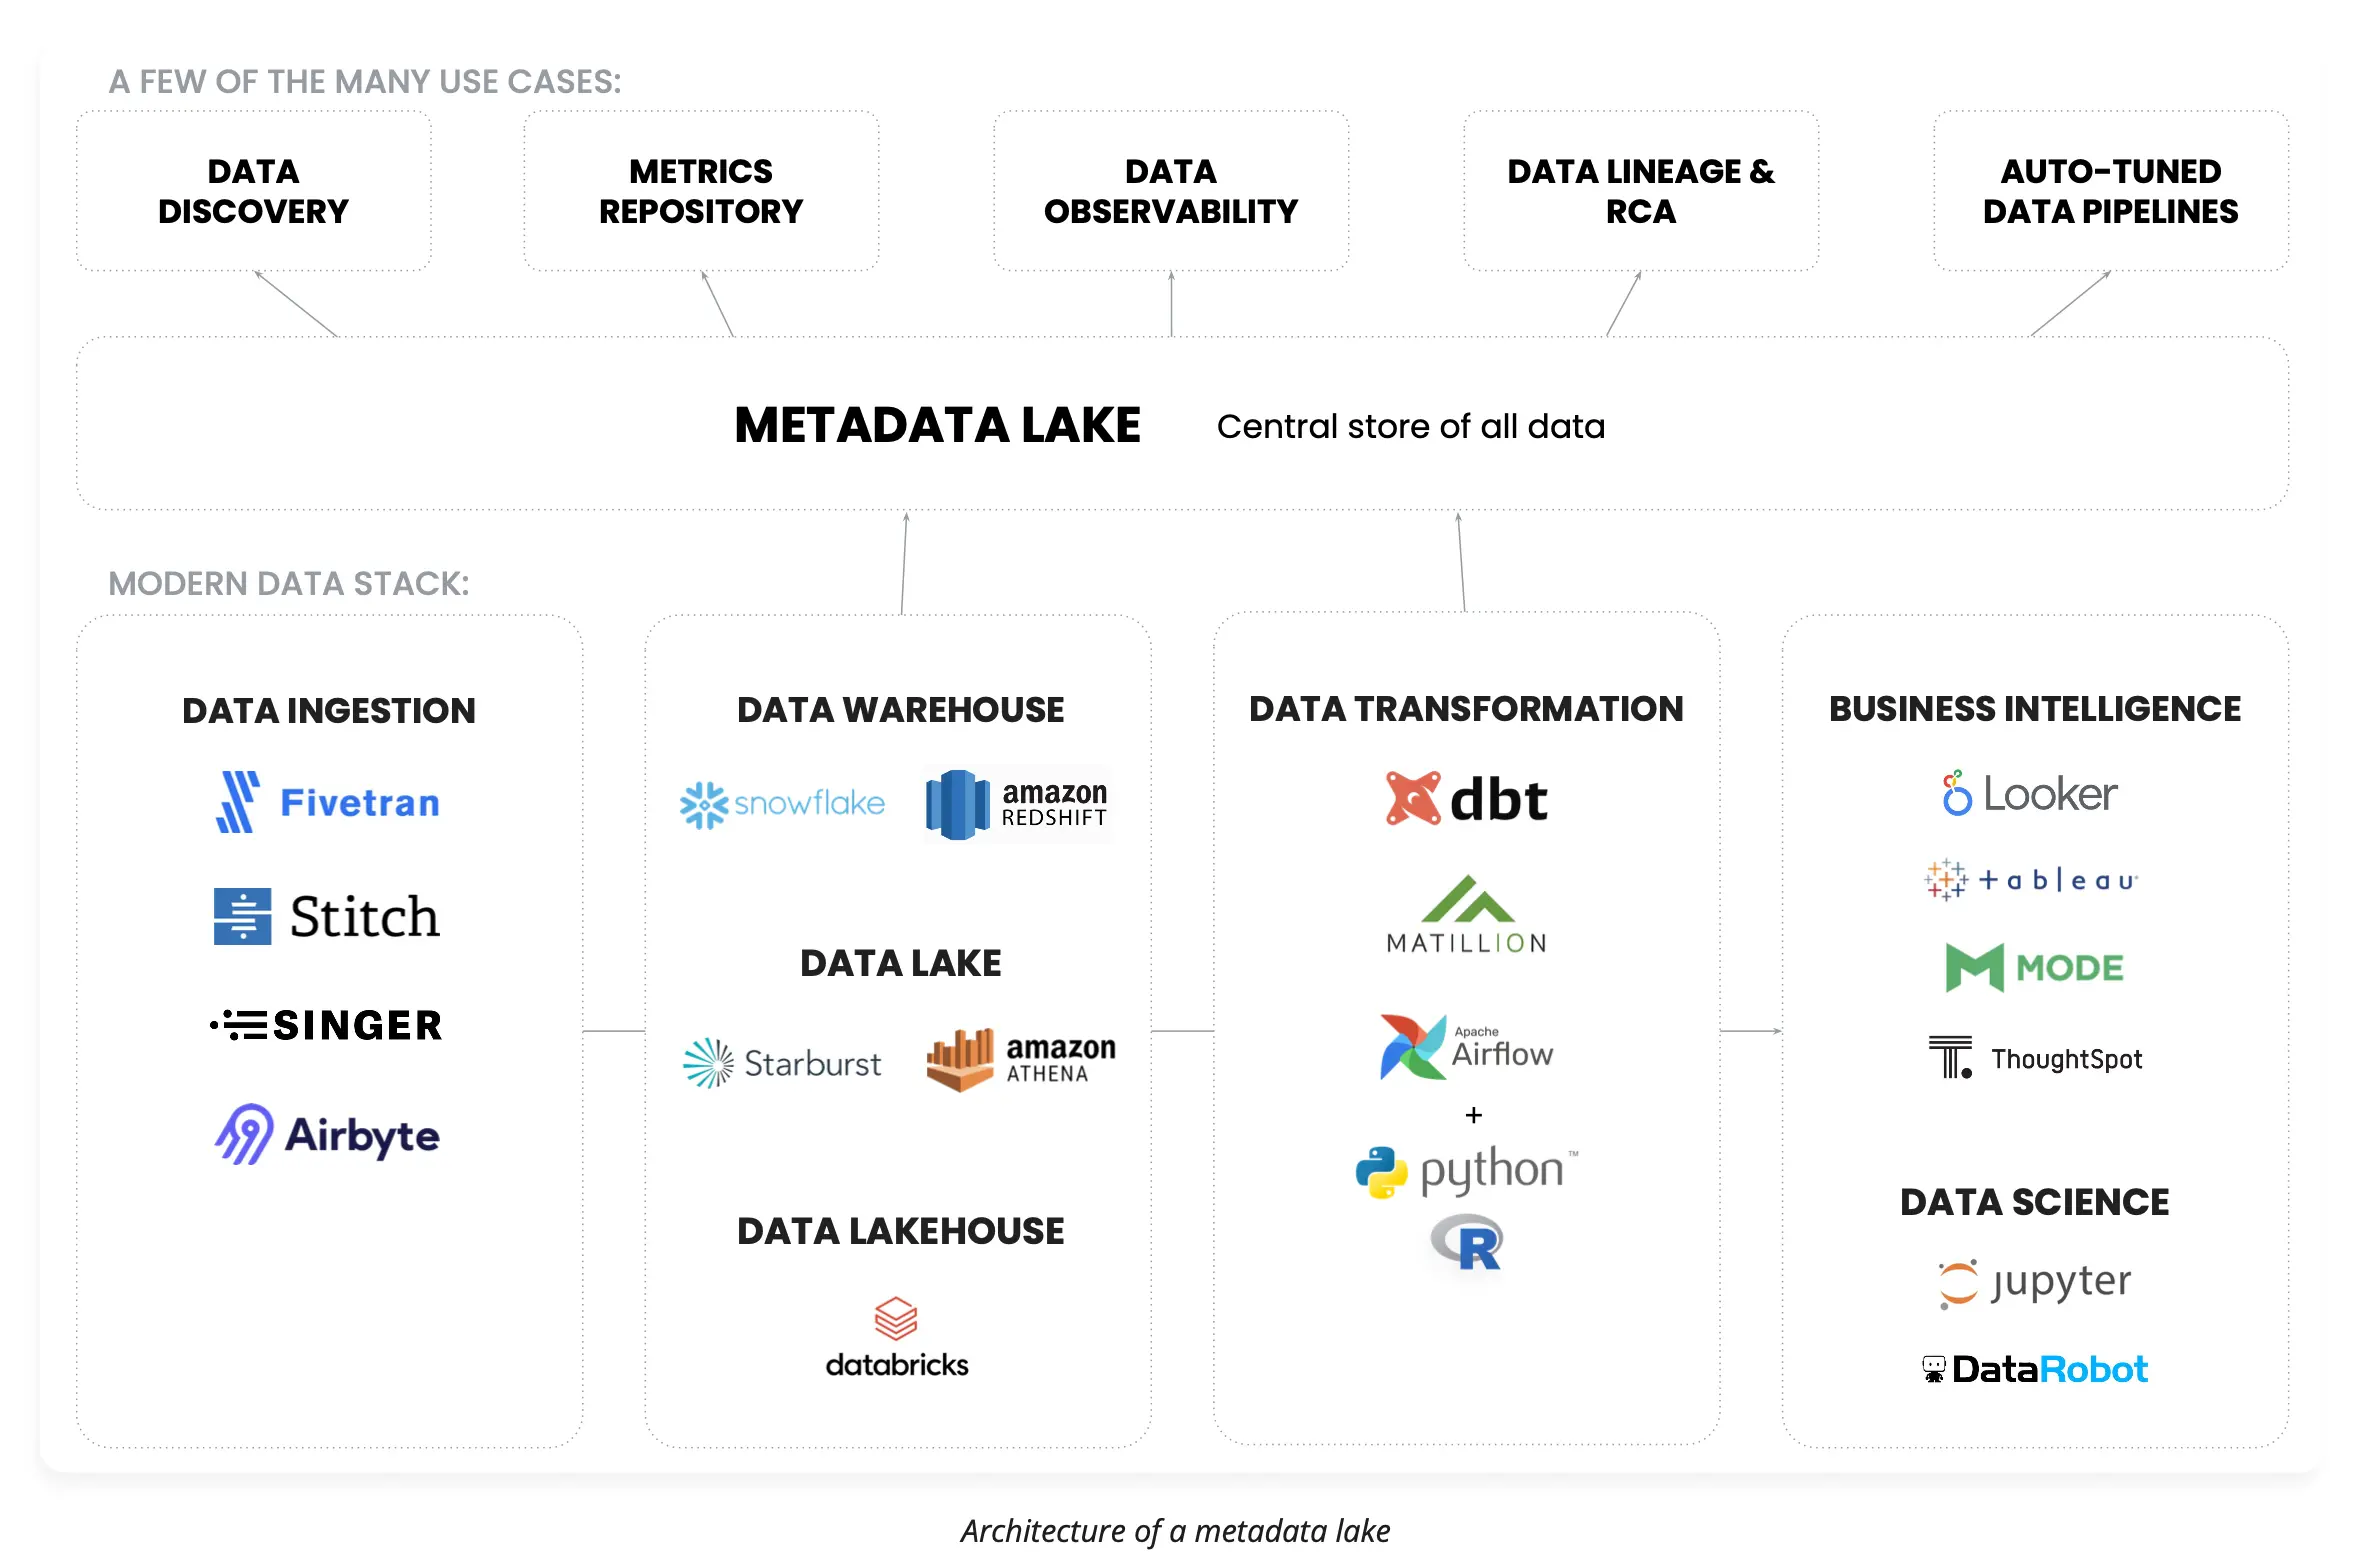 Architecture of enterprise metadata lake: A unified repository for metadata management from disperate data sources. Source: Atlan